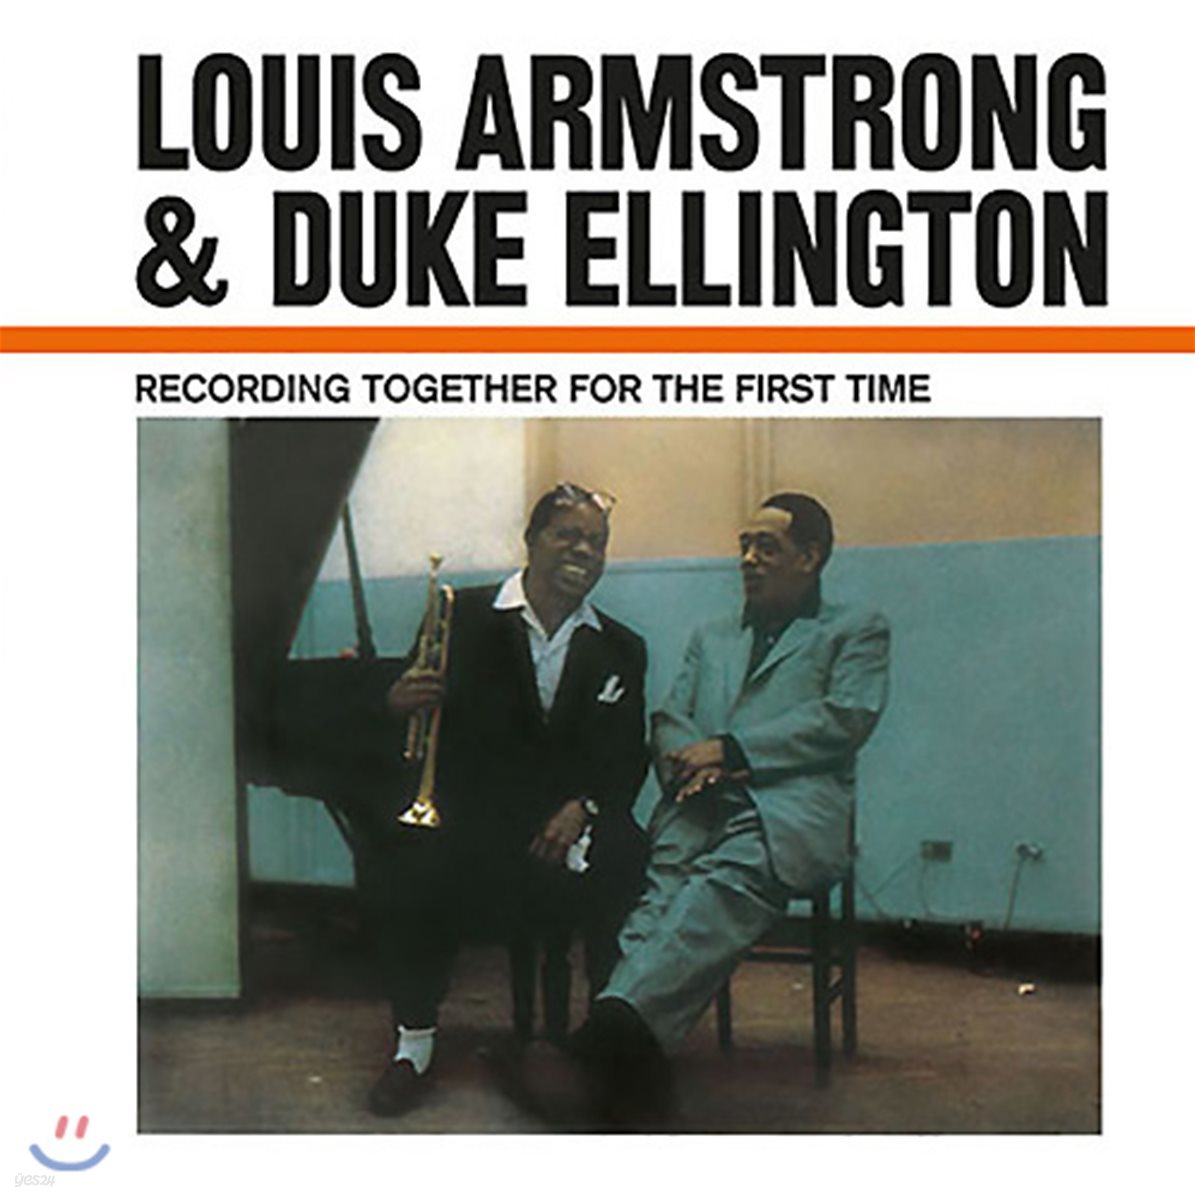 Louis Armstrong &amp; Duke Ellington (루이 암스트롱, 듀크 엘링턴) - Recording Together For The First Time [LP]